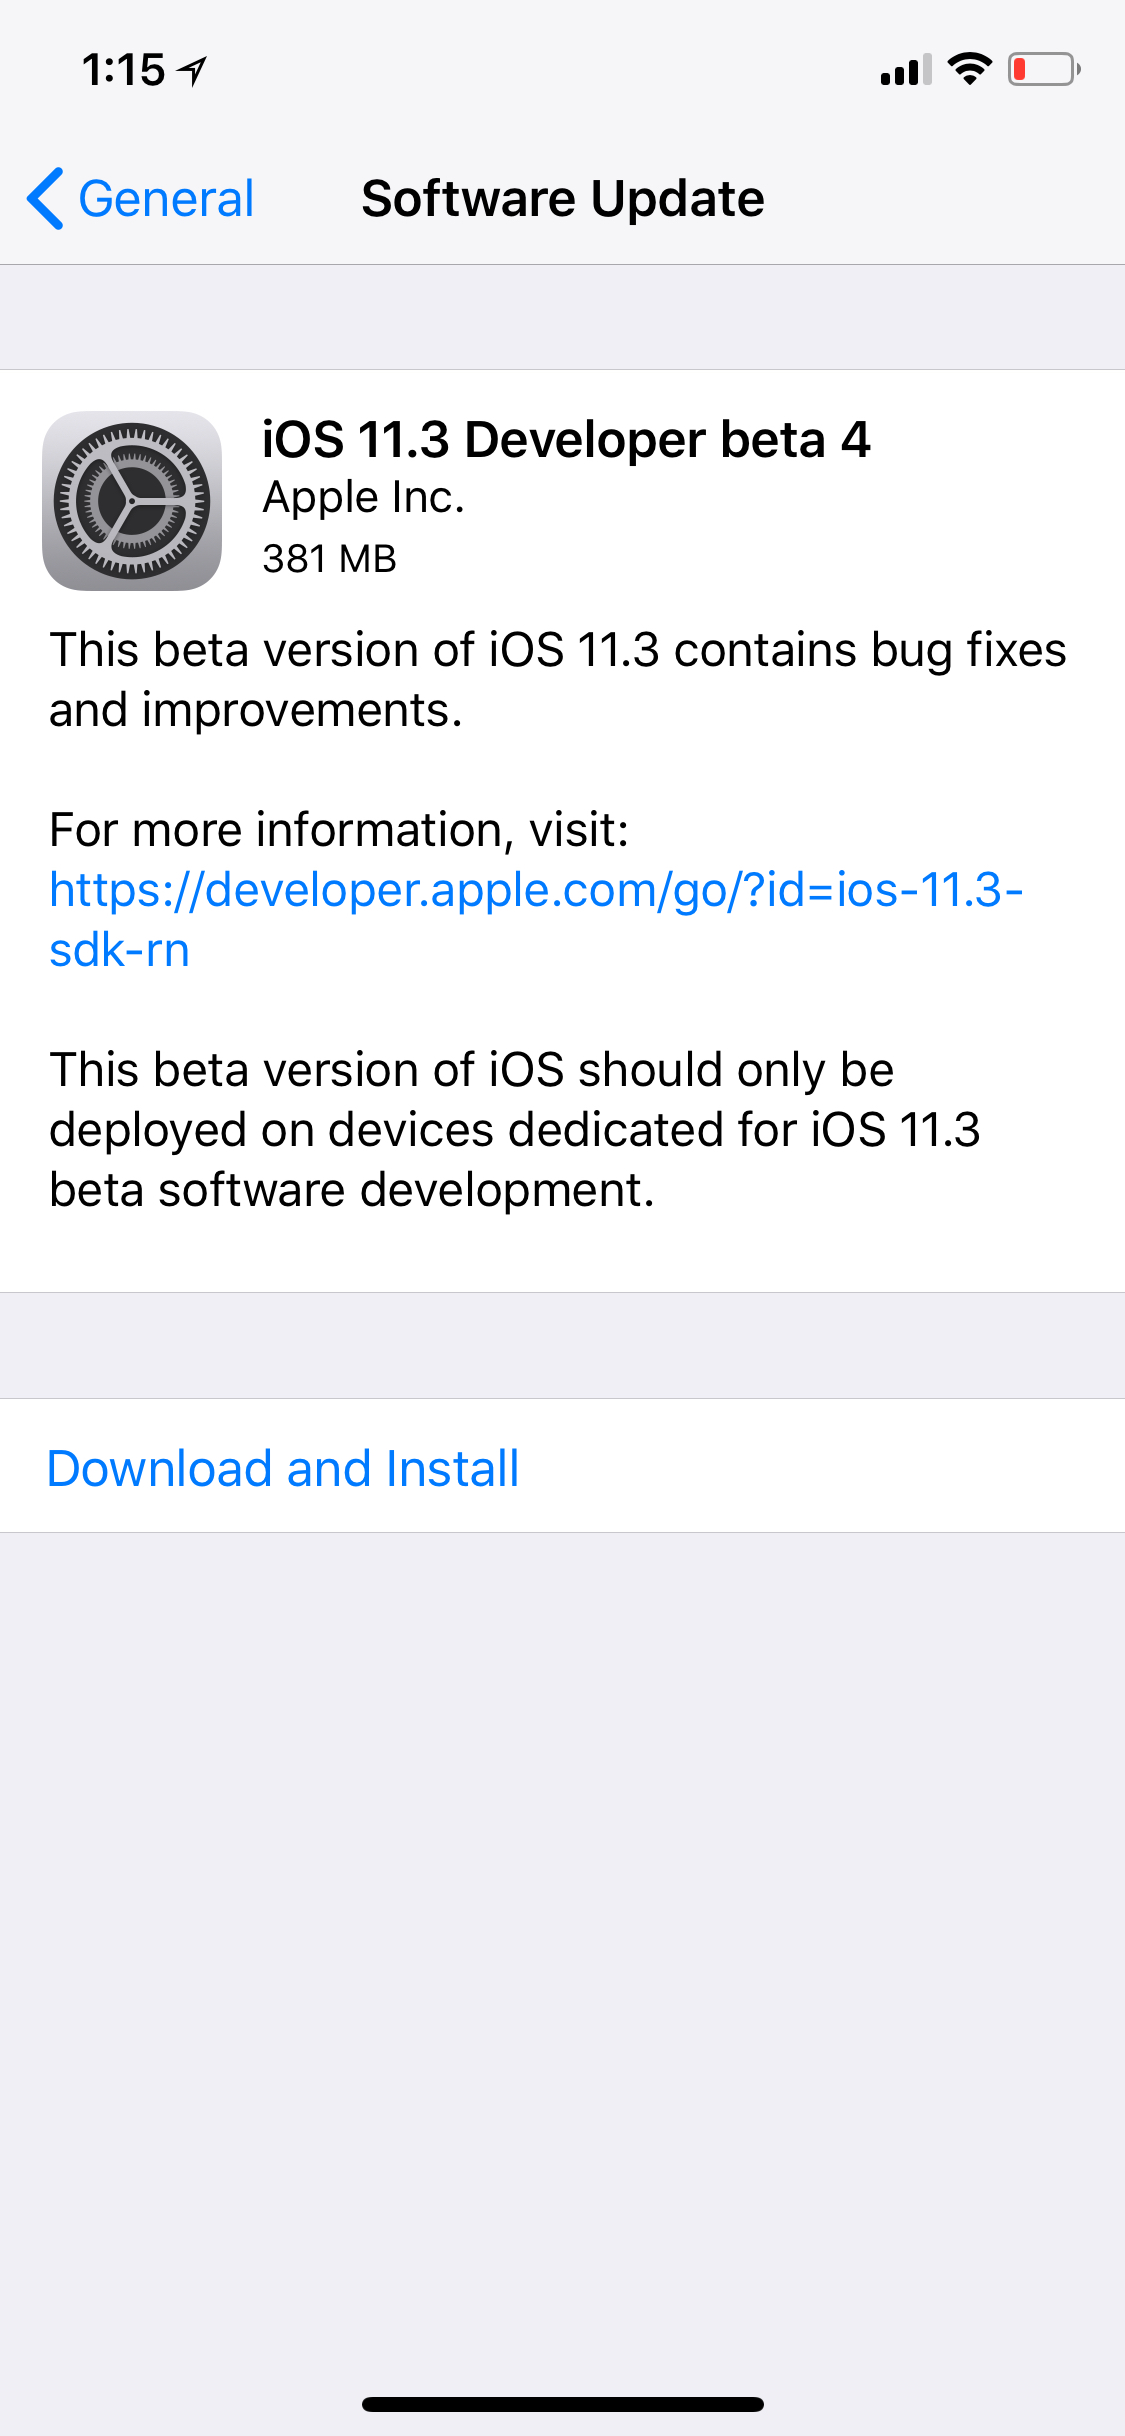 Apple Releases iOS 11.3 Beta 4 to Developers [Download]